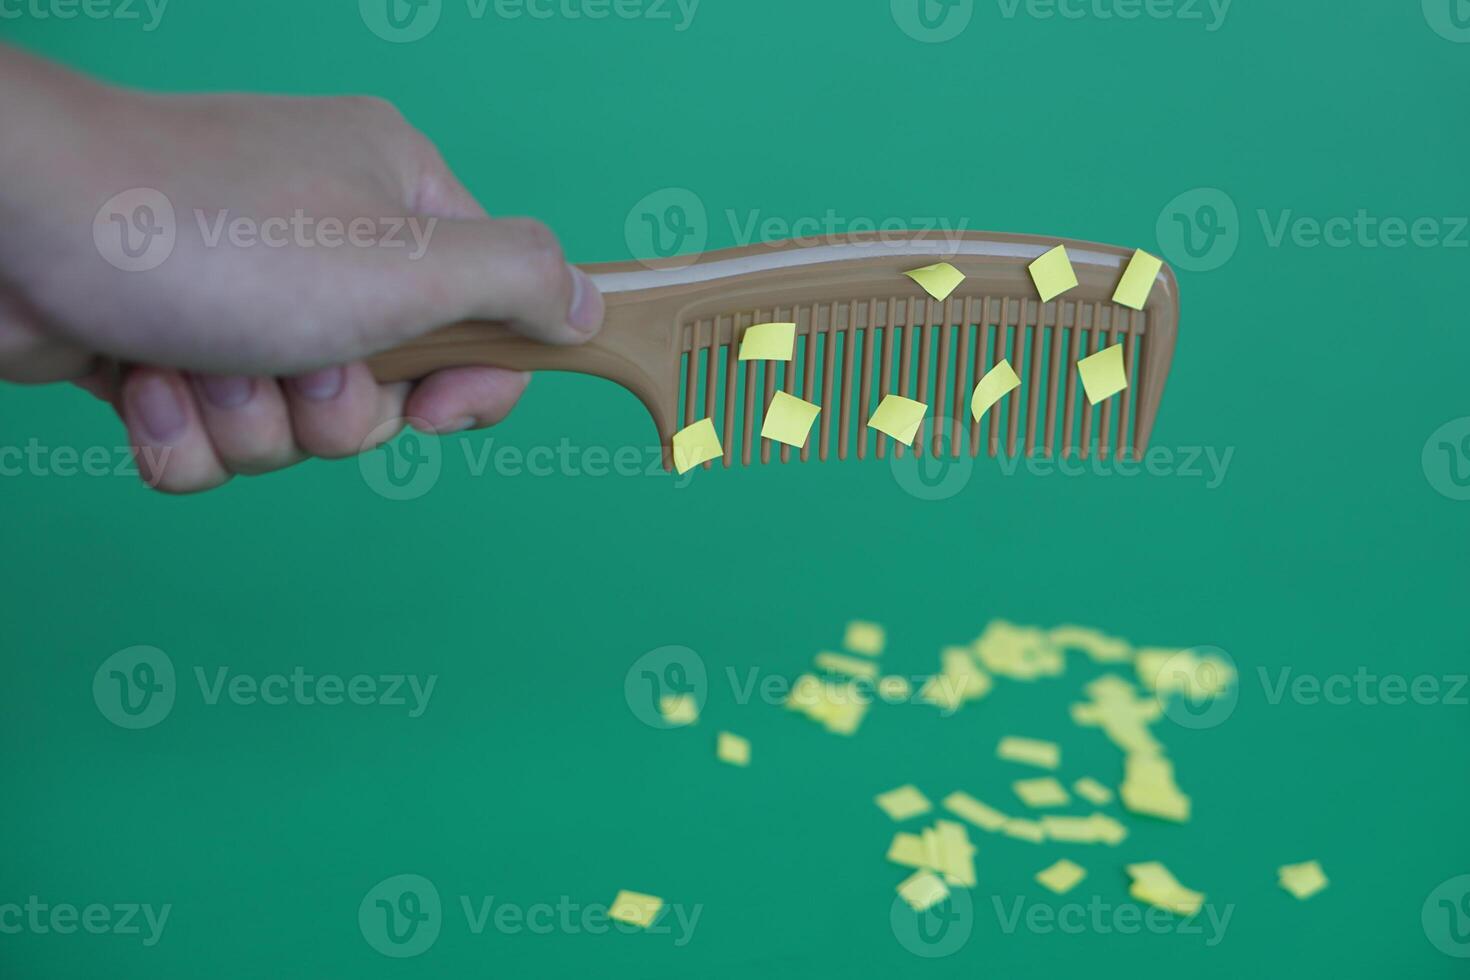 Comb and small pieces of paper. Equipment, prepared to do experiment about static electricity. Green background. Concept, Science lesson, fun and easy experiment. Education. Teaching aids. photo